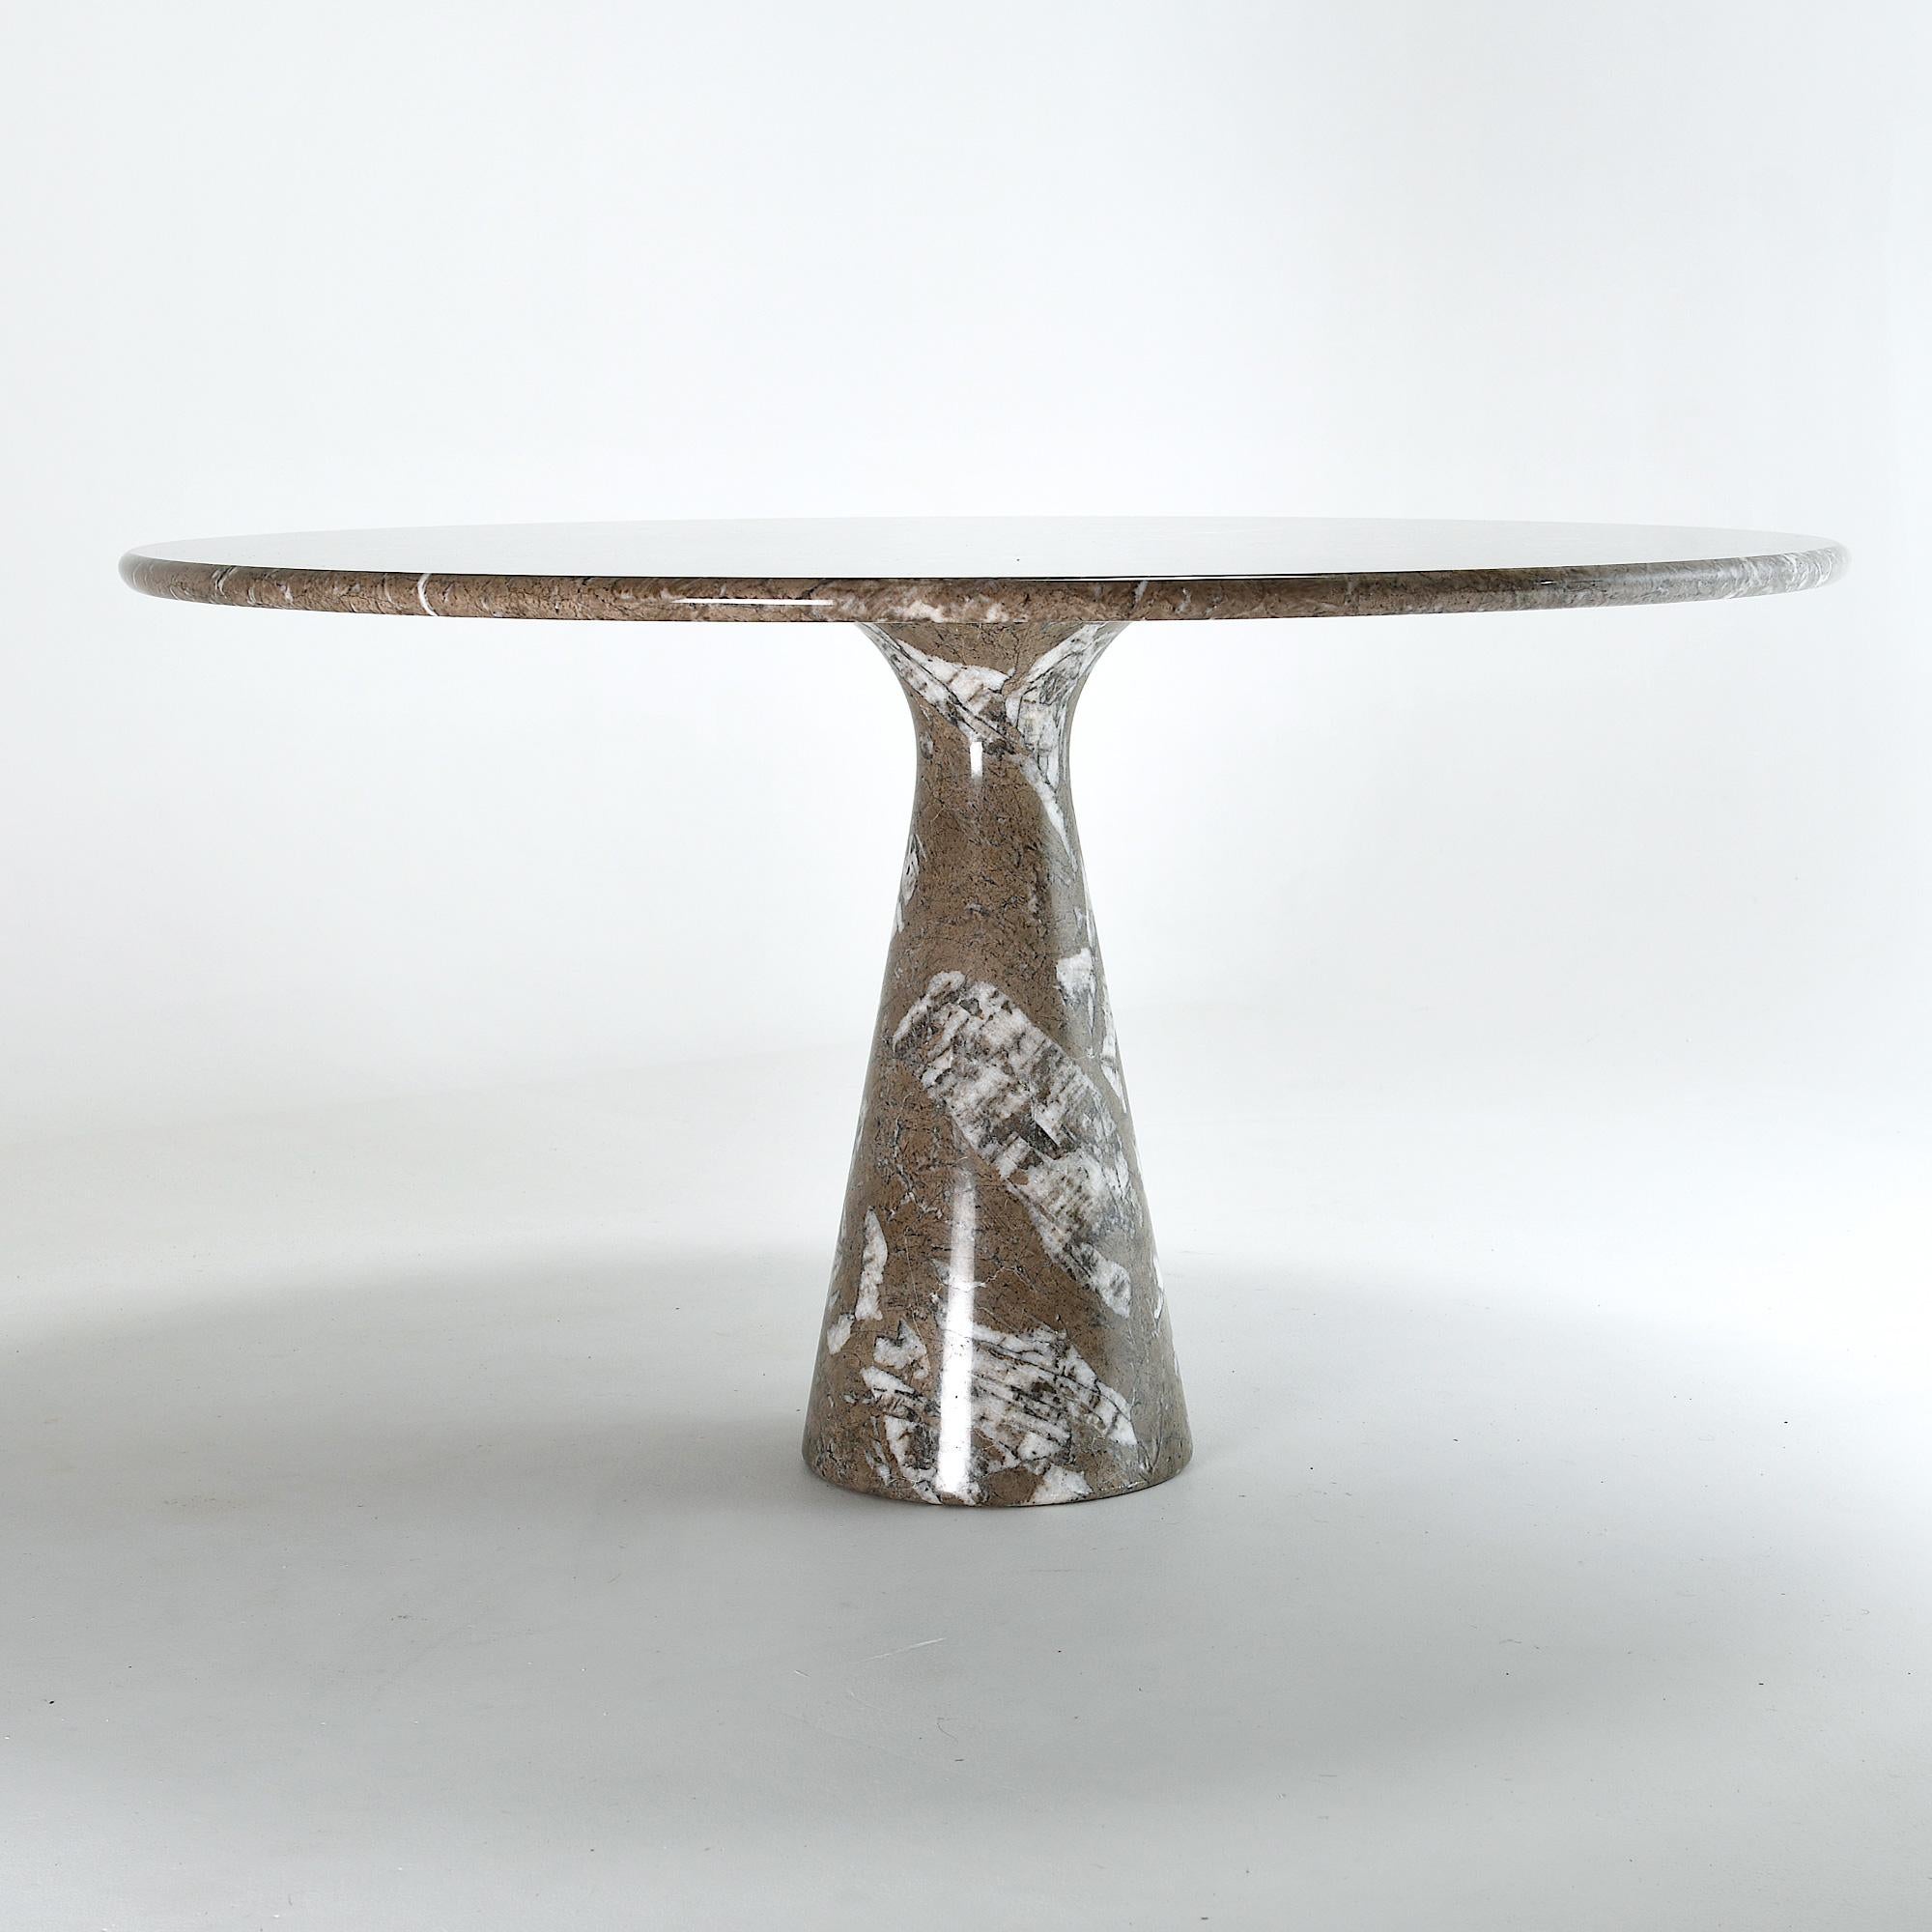 Round marble dining table on diabolo shaped pedestal leg.
Designed in 1960 by Angelo Mangiarotti, well known for his ingeneer skills .
The challenge for the M1 was to keep the minimum material in the foot to hold the table top.
The result is this